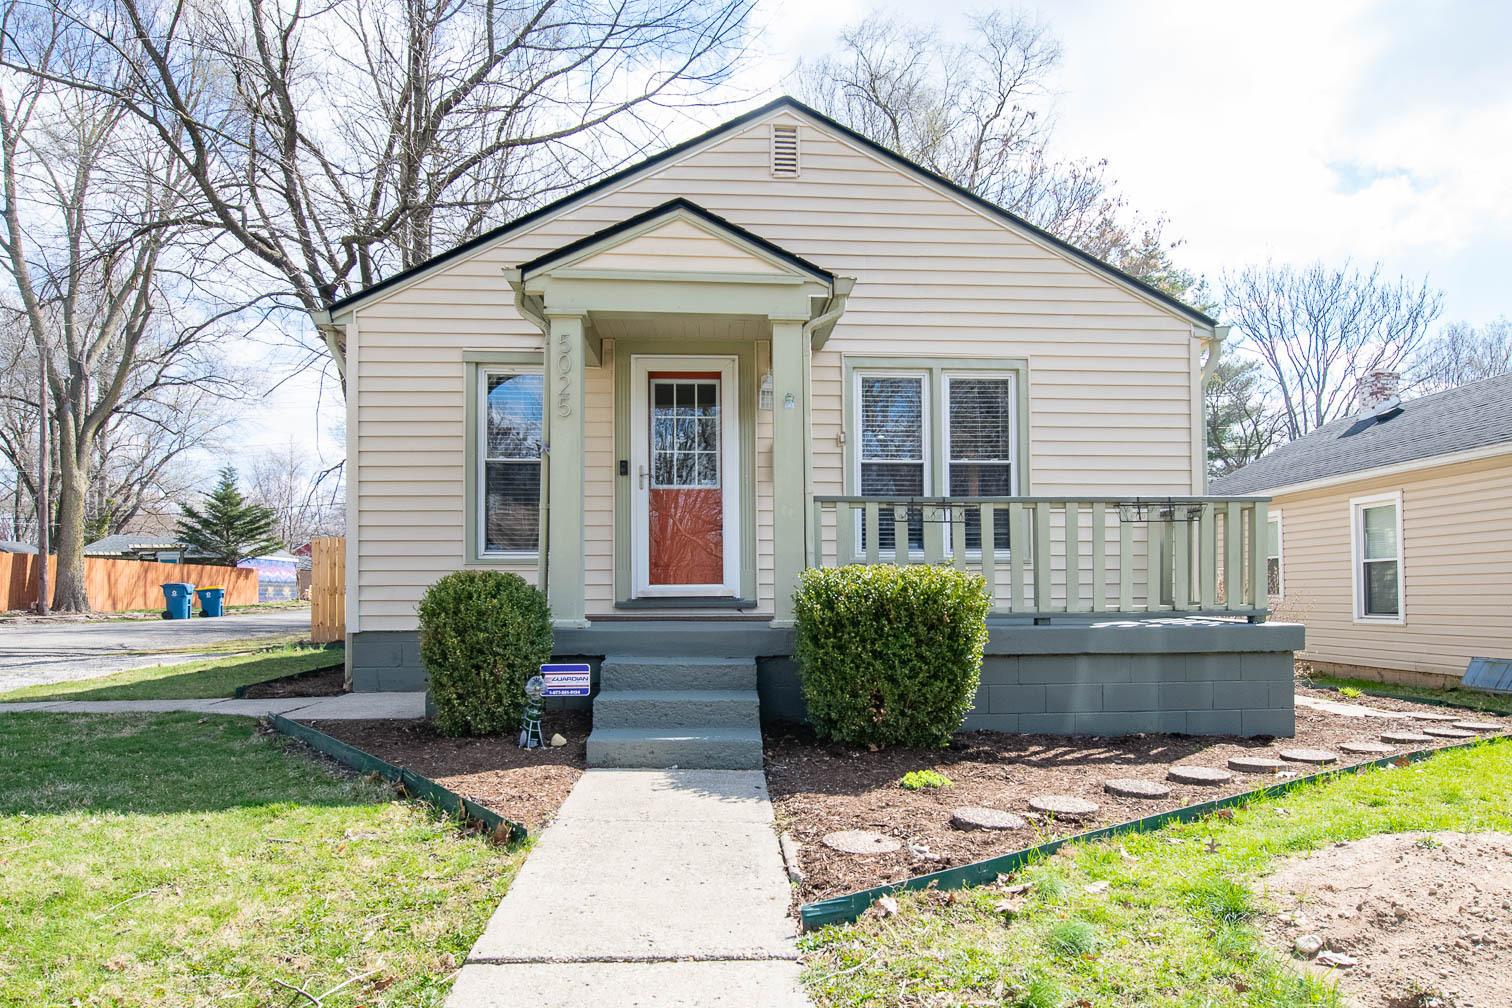 Photo one of 5025 Indianola Ave Indianapolis IN 46205 | MLS 21967262